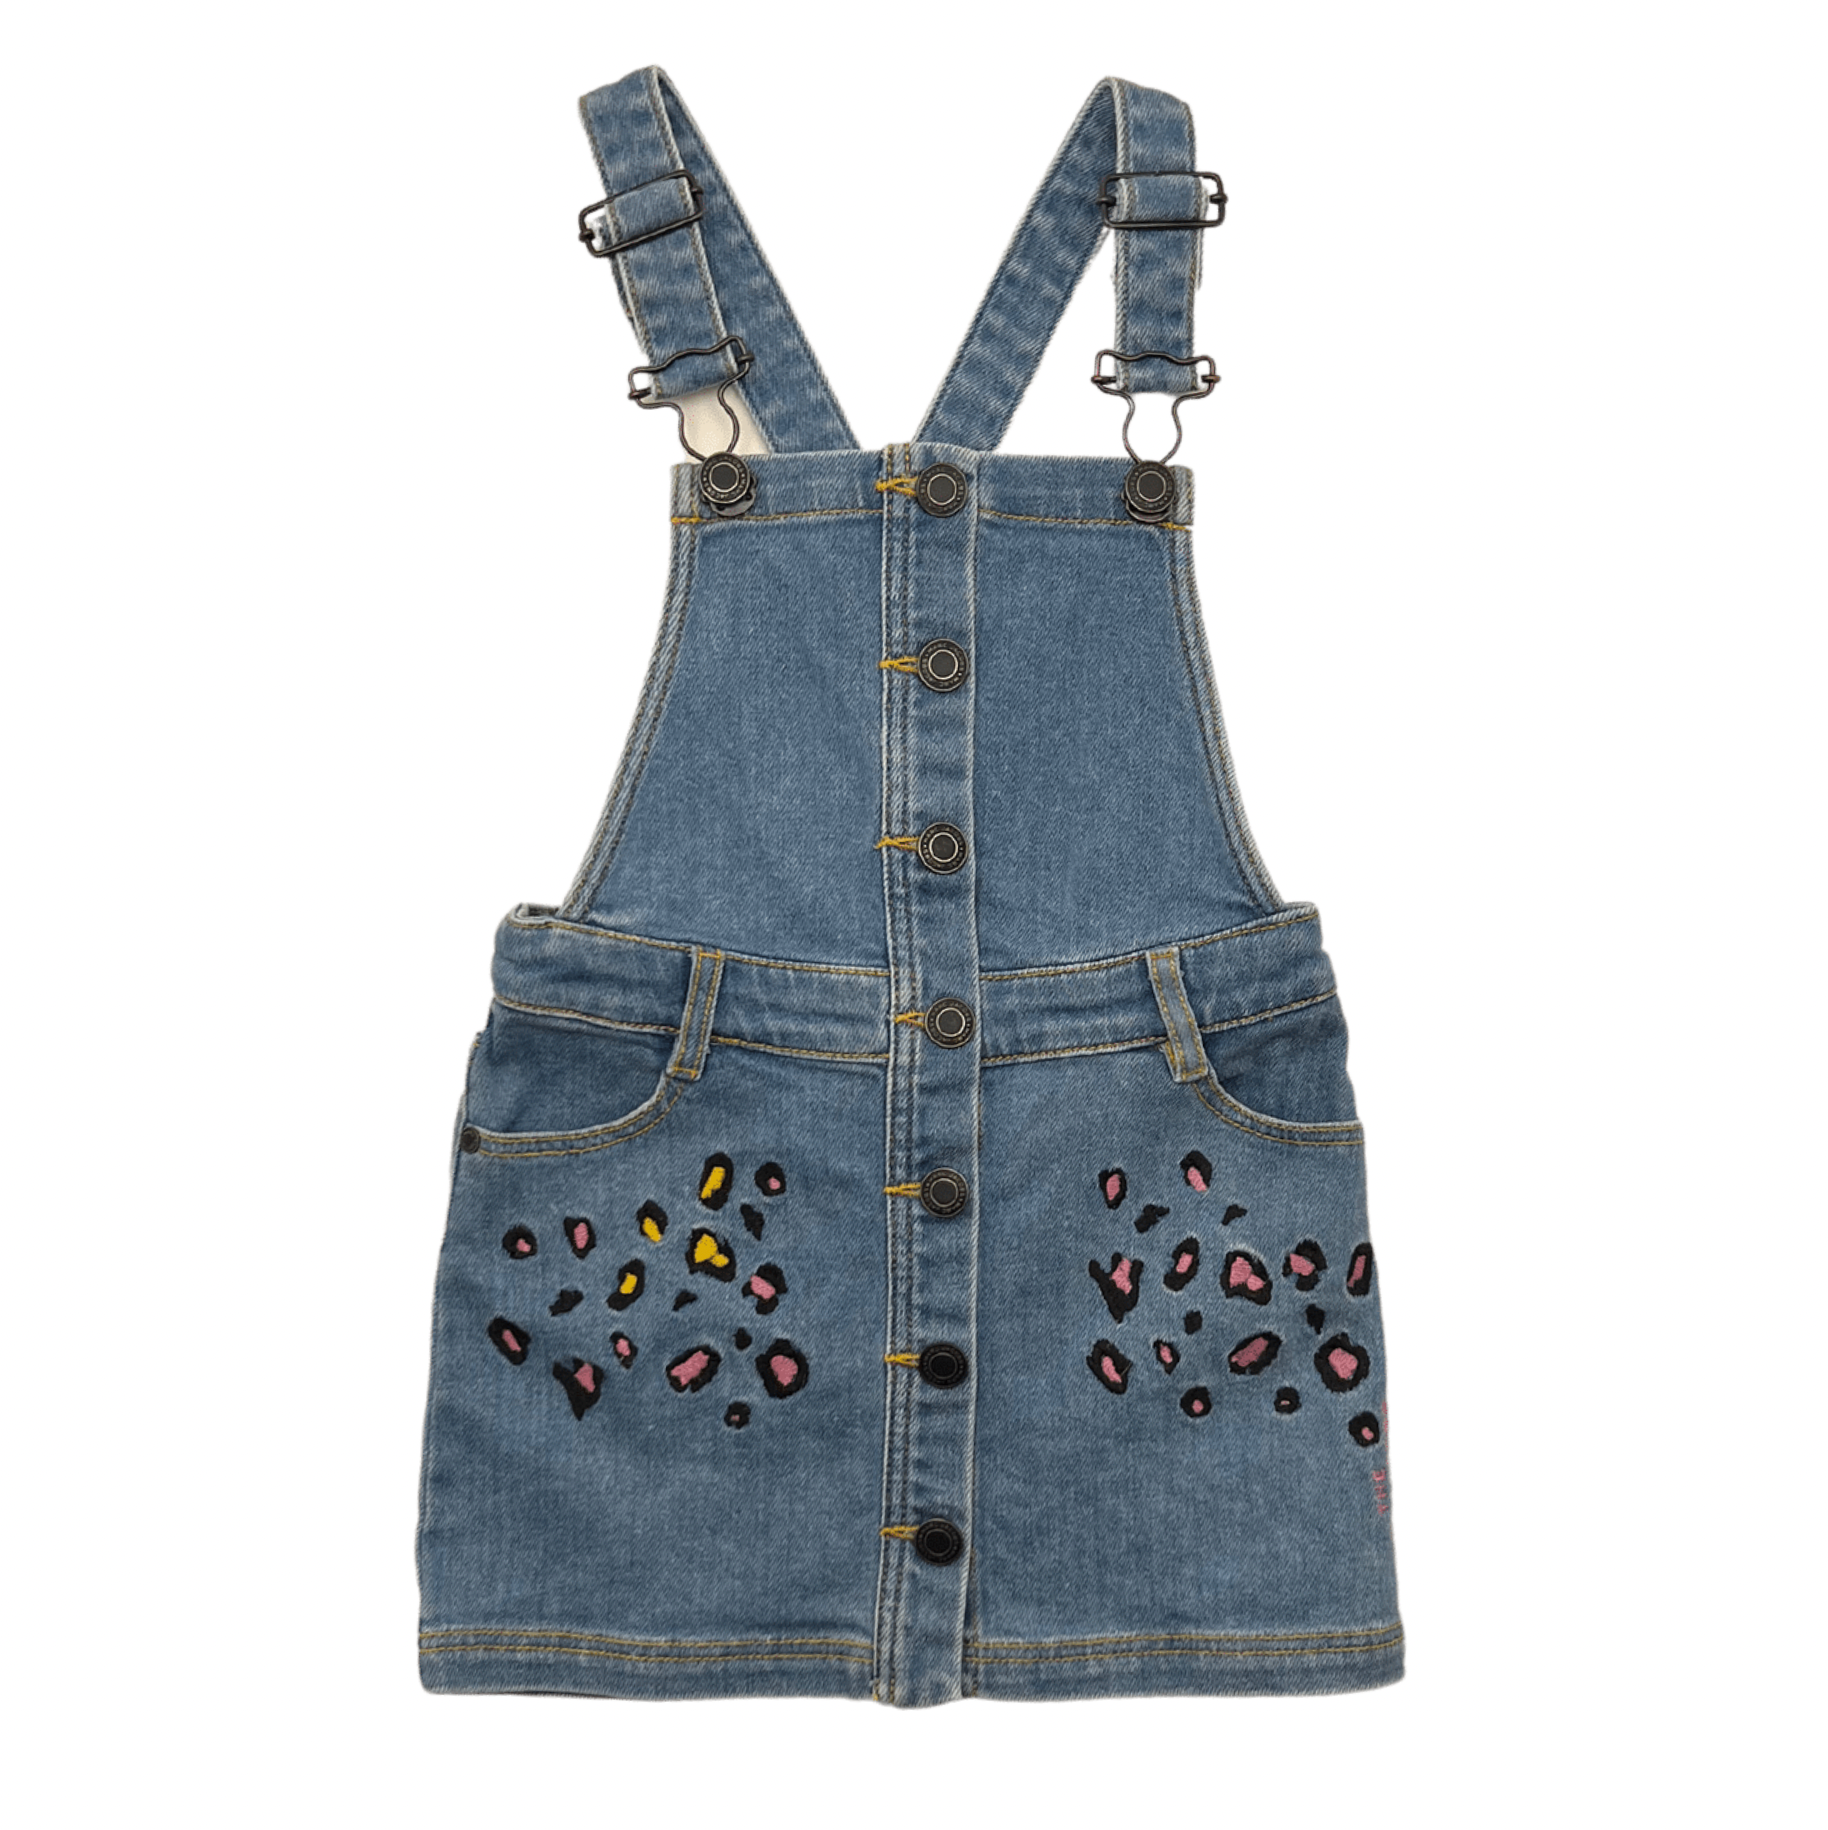 THE MARC JACOBS - Denim dress - 4 years old